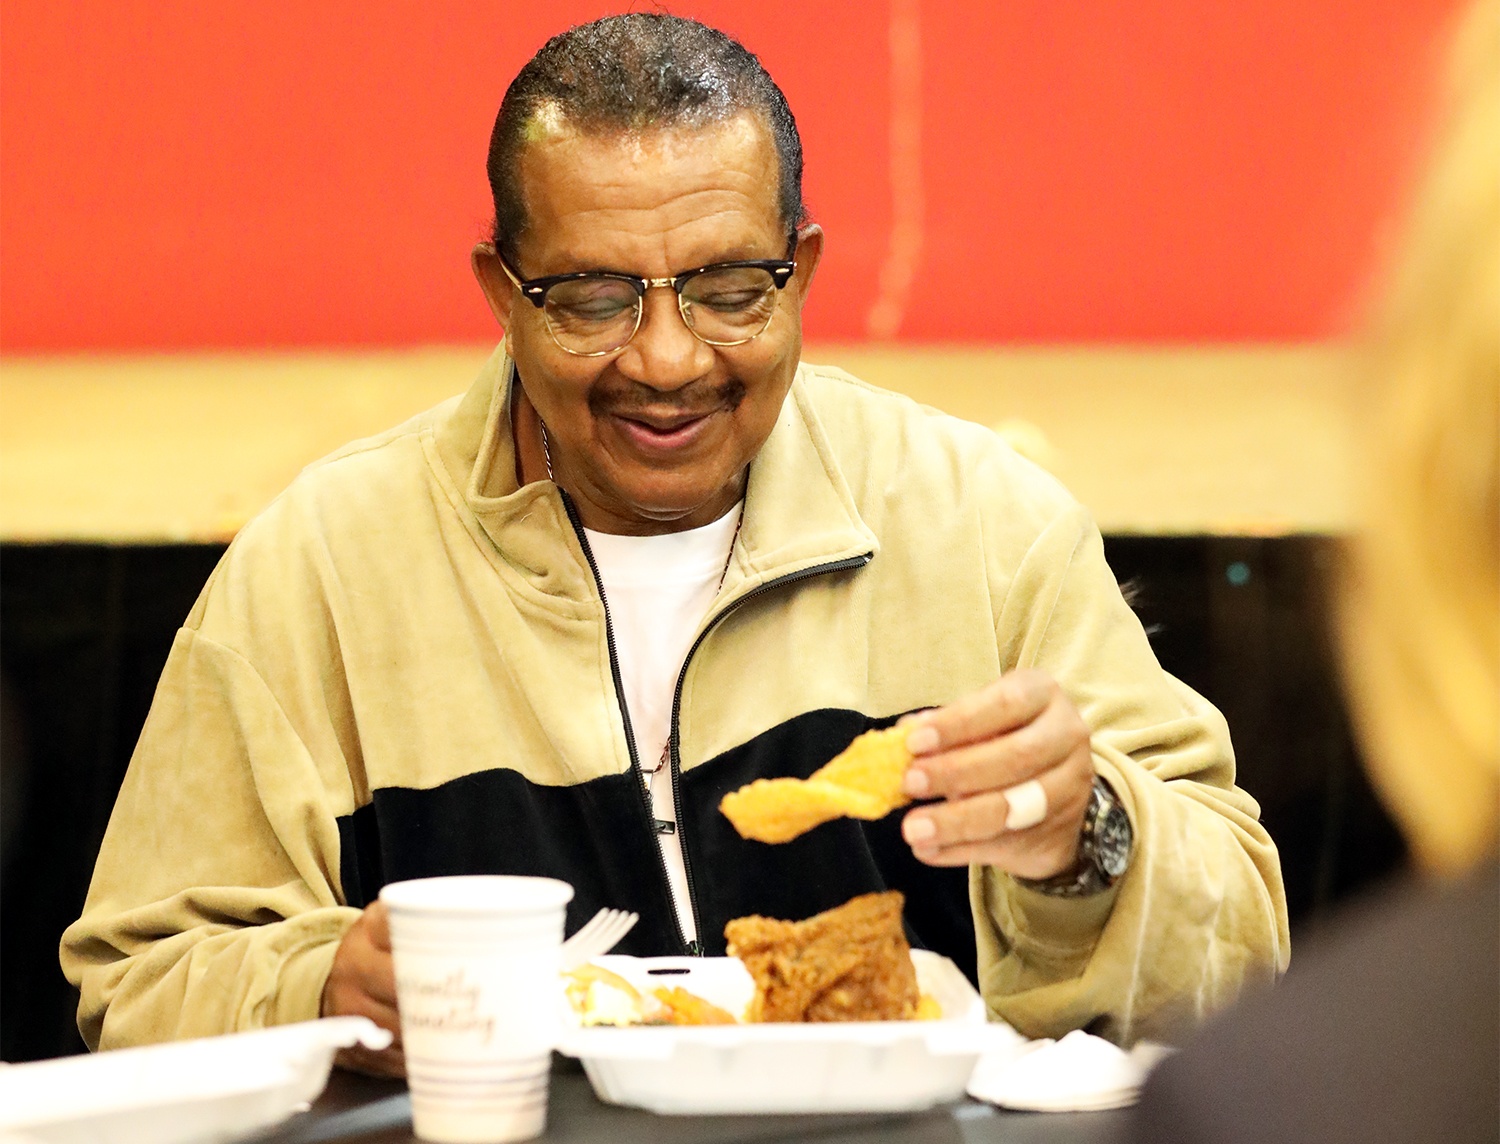 Michael Thompson holds a piece of fried fish during his first meal out of prison. January 28th, 2021.